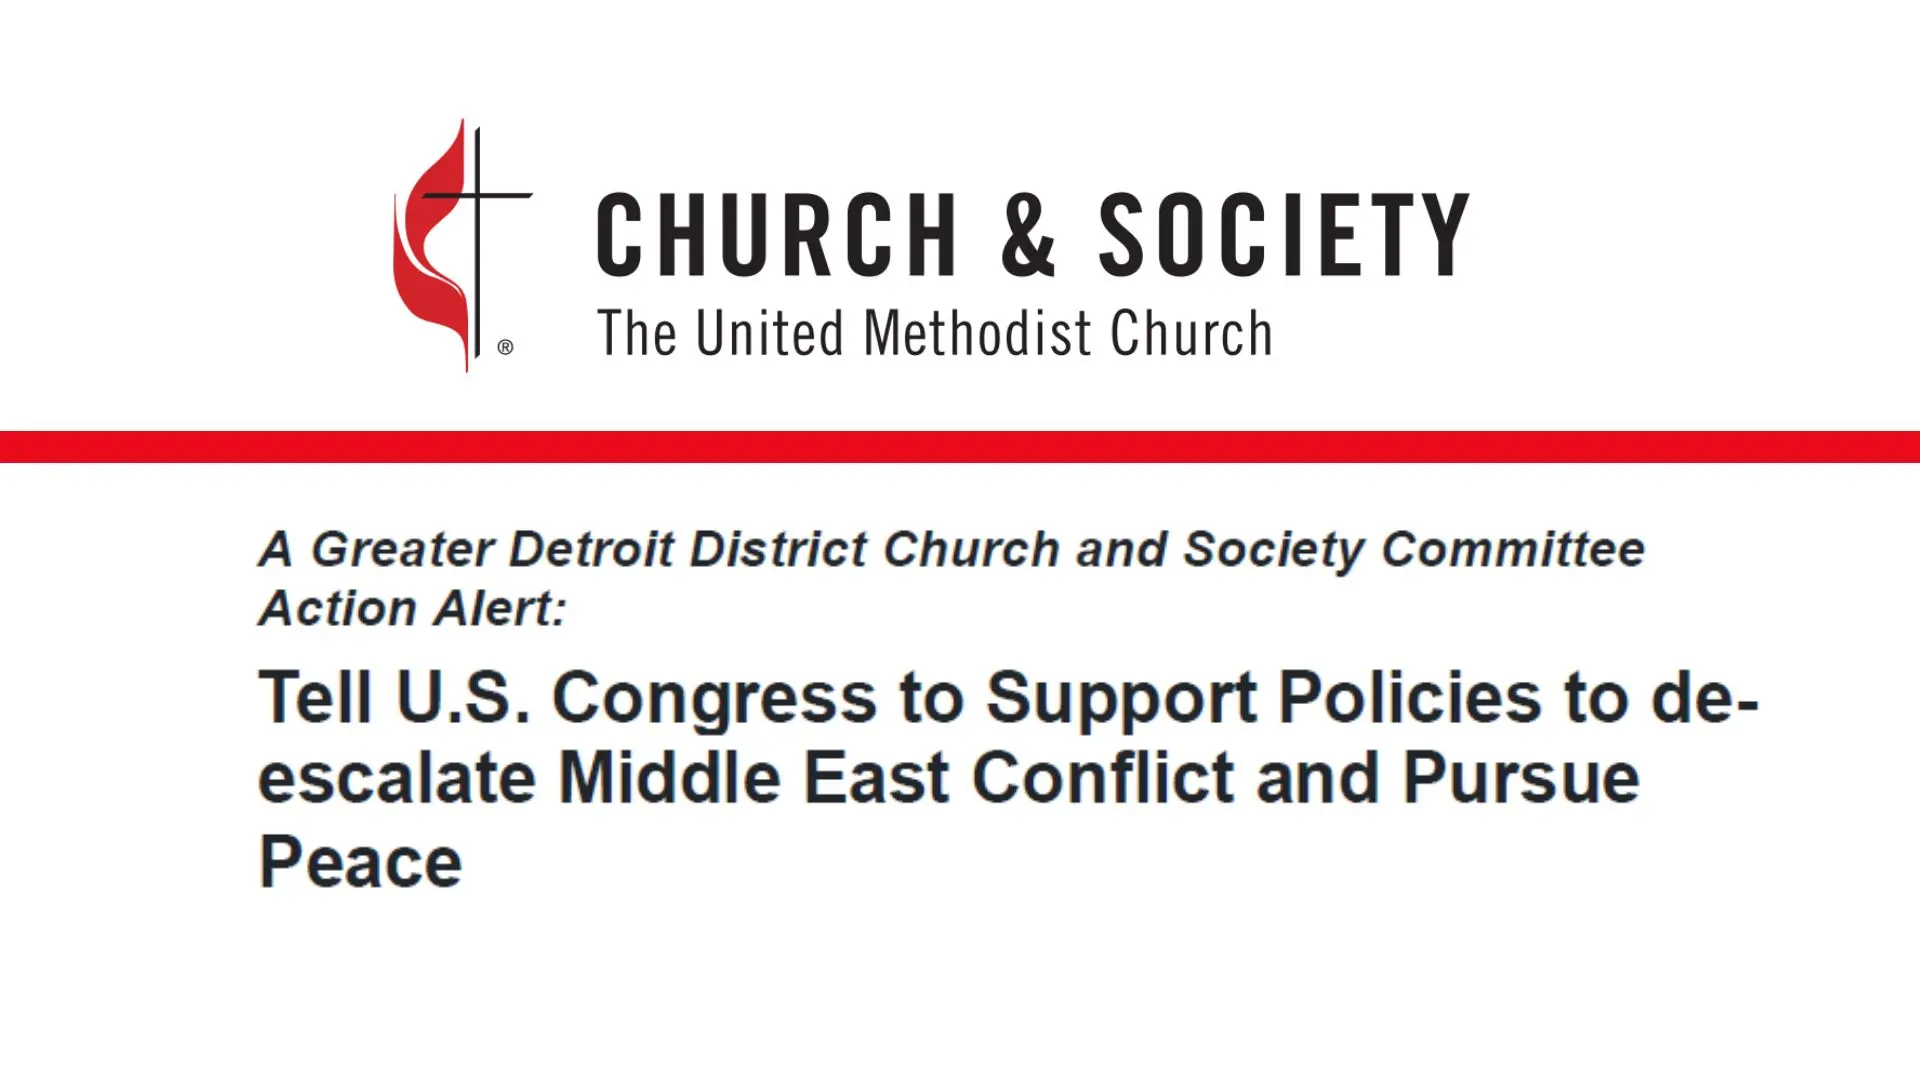 Tell U.S. Congress to Support Policies to deescalate Middle East Conflict and Pursue Peace